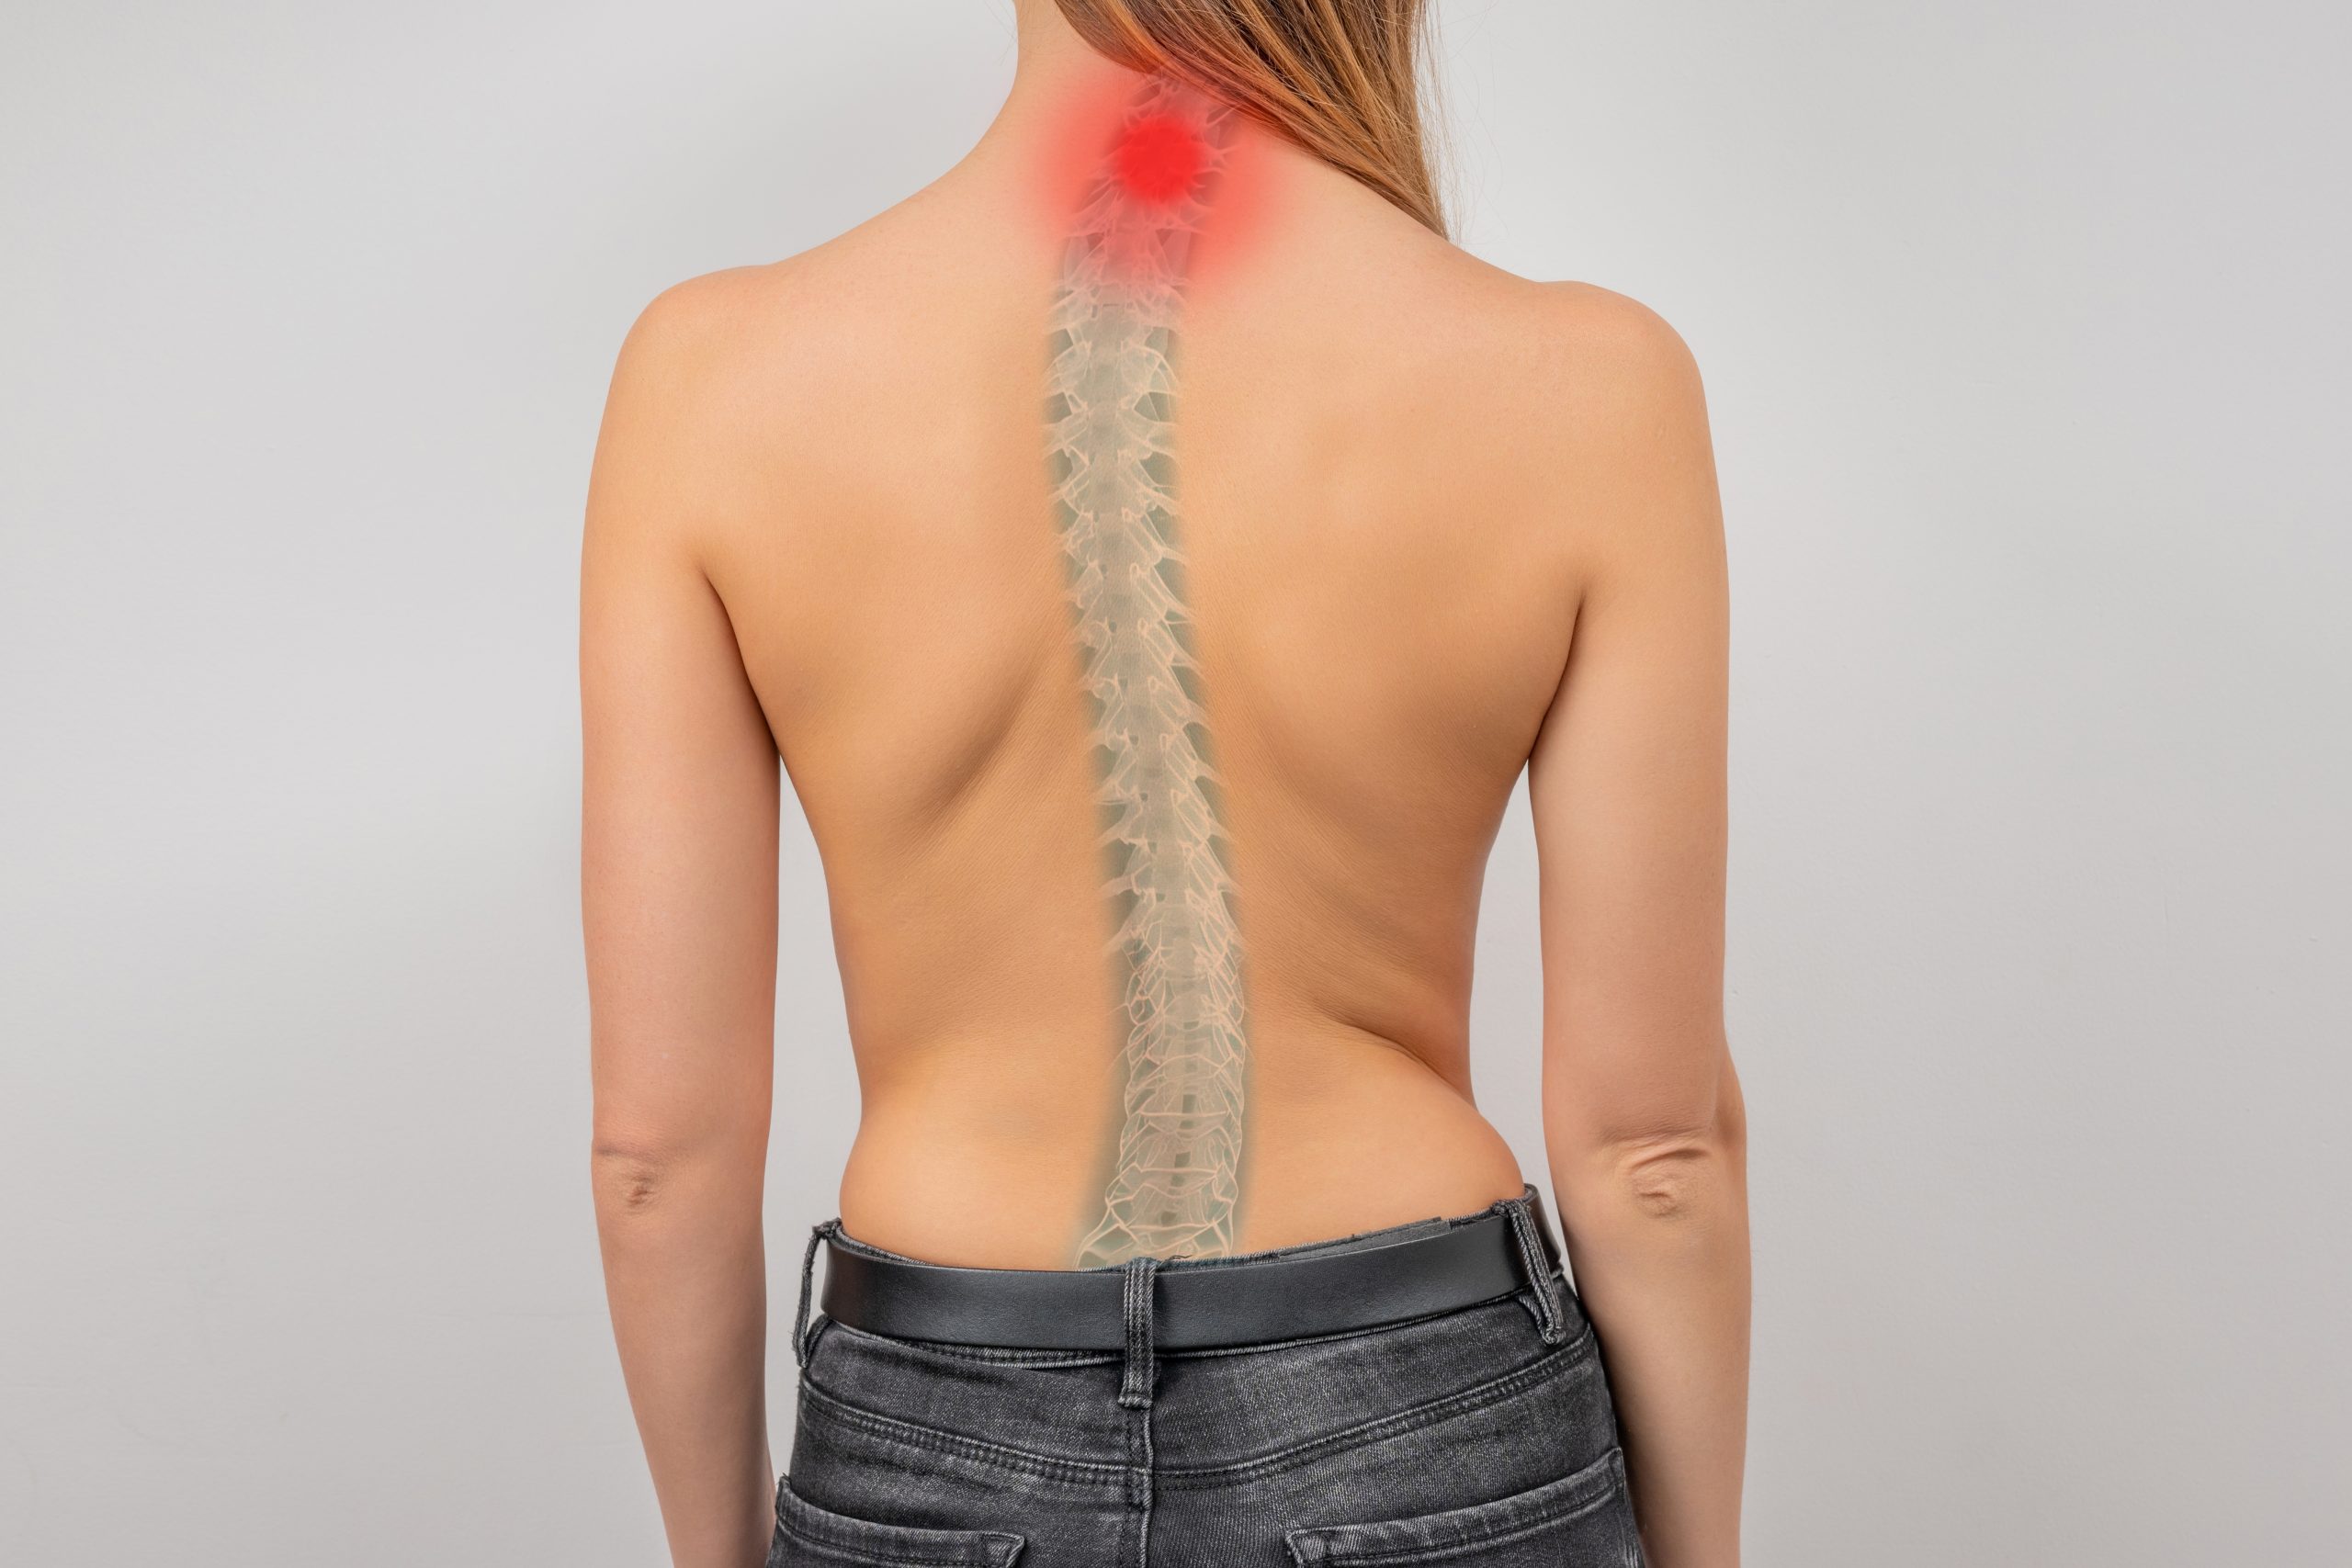 Cervical Lordosis Chiropractic Treatment Near Everett, WA